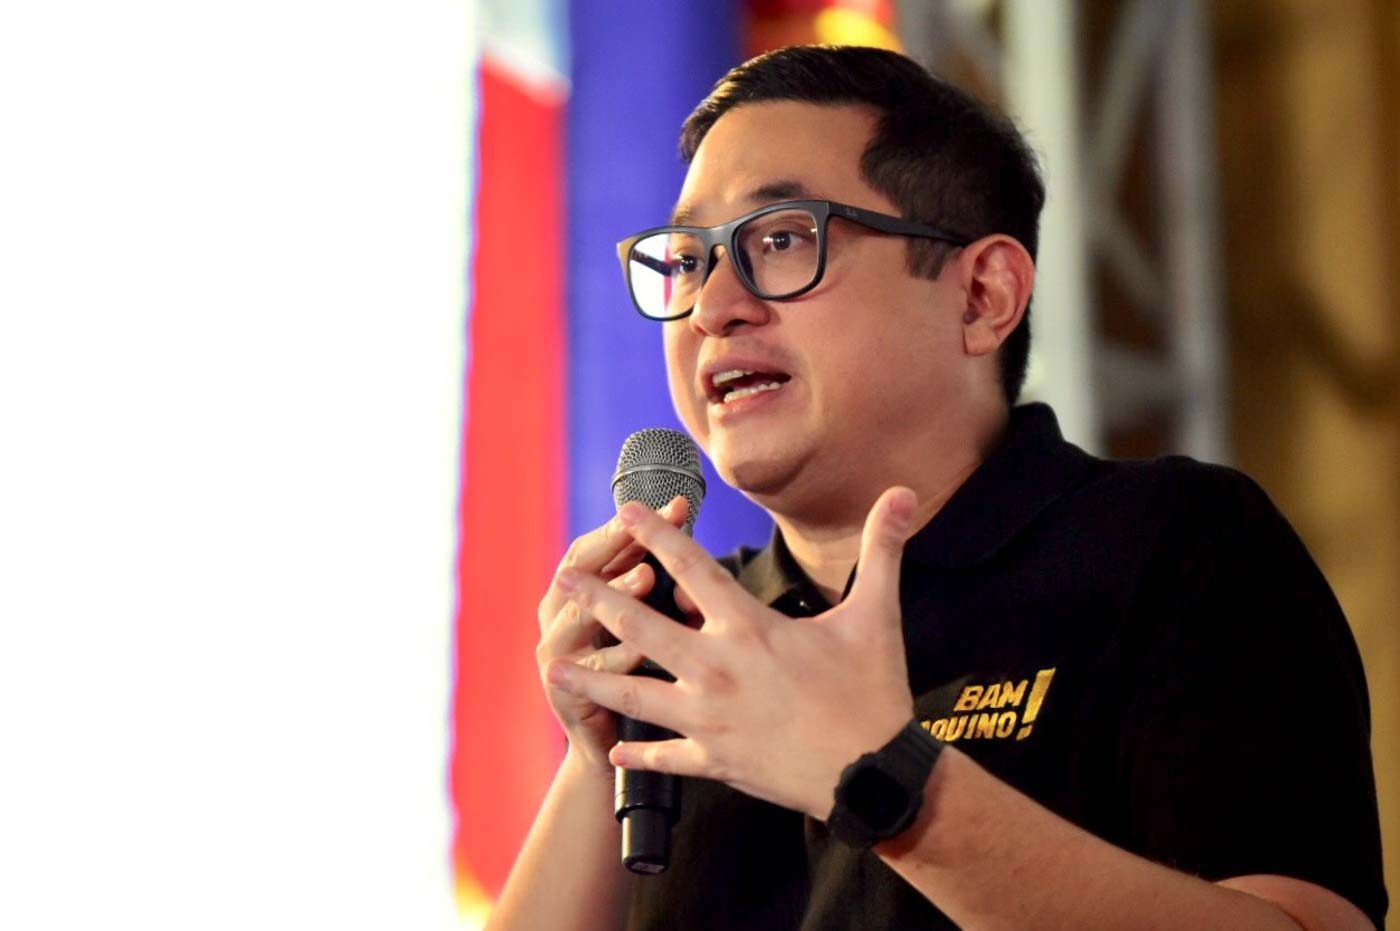 We need laws on quick rehabilitation from disasters – Bam Aquino